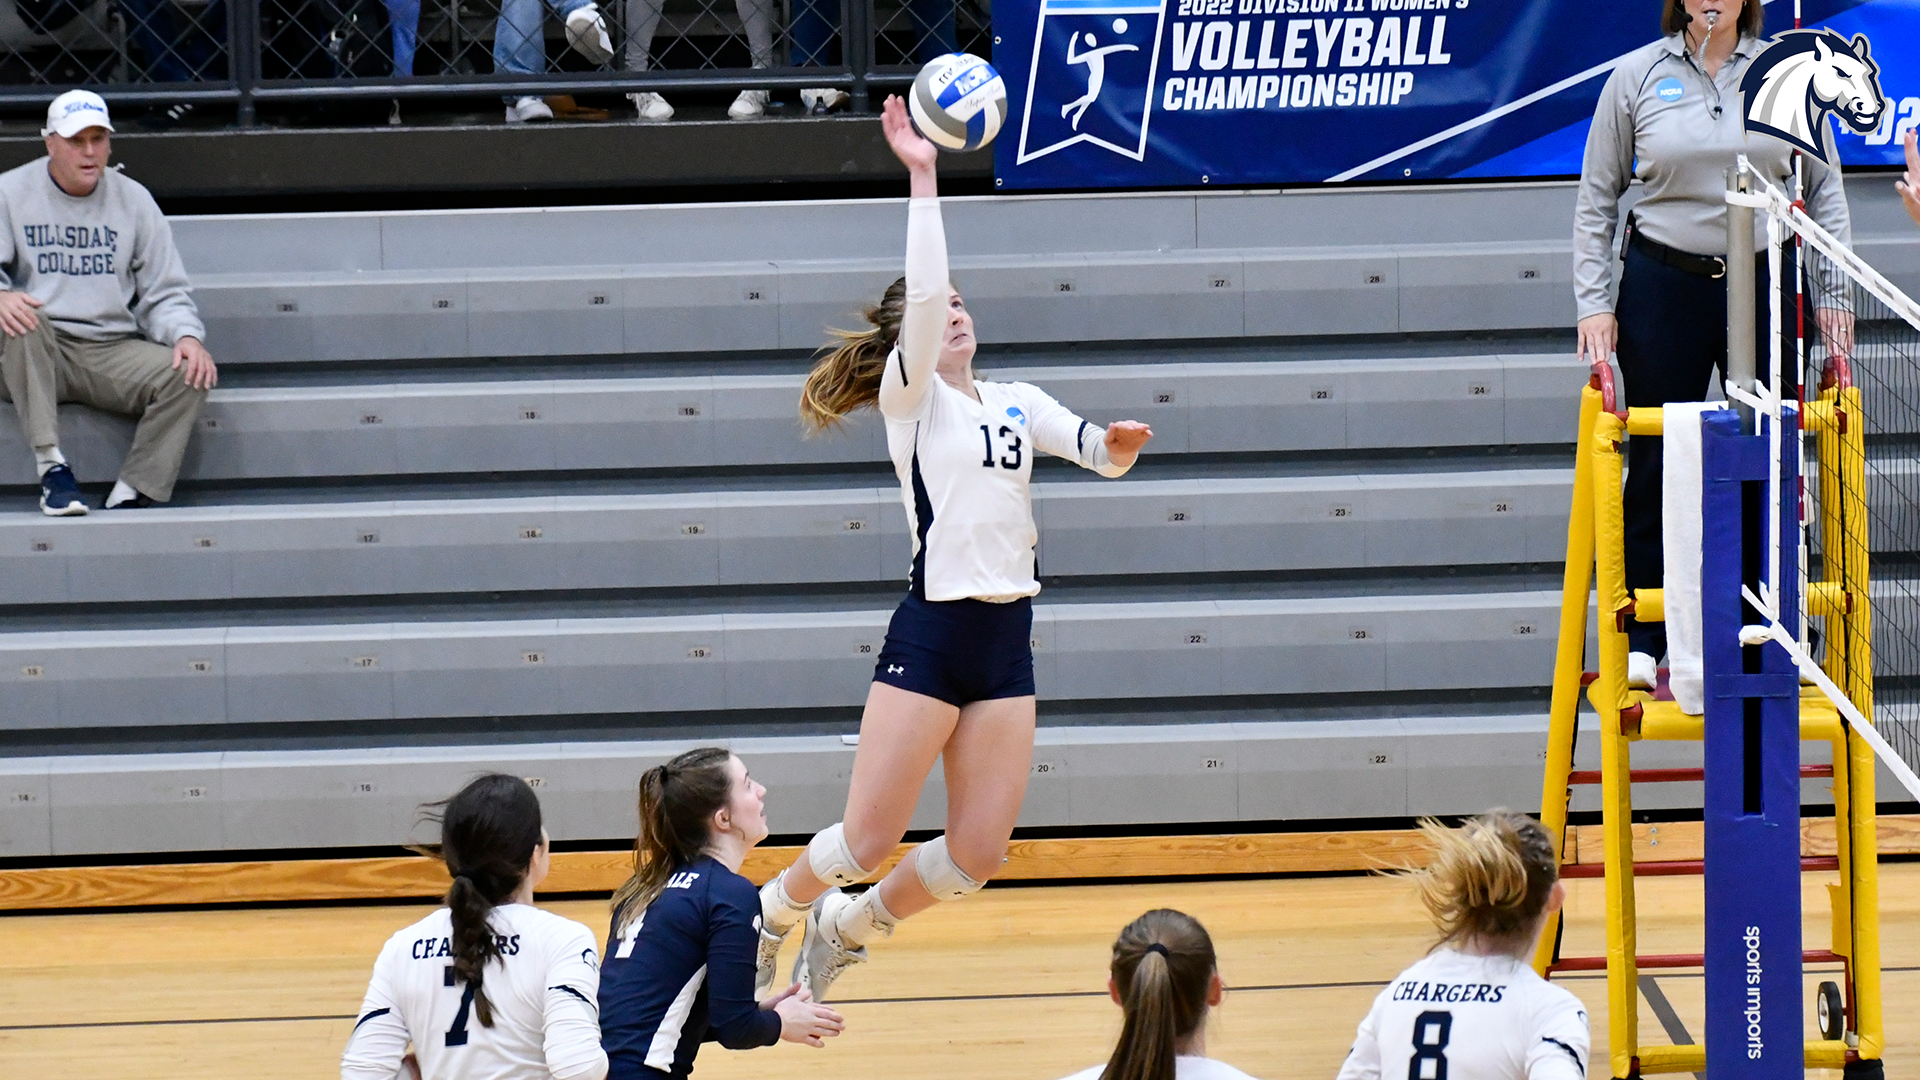 #7 Chargers stun #2 Lewis in five-set classic to advance in NCAA Tournament